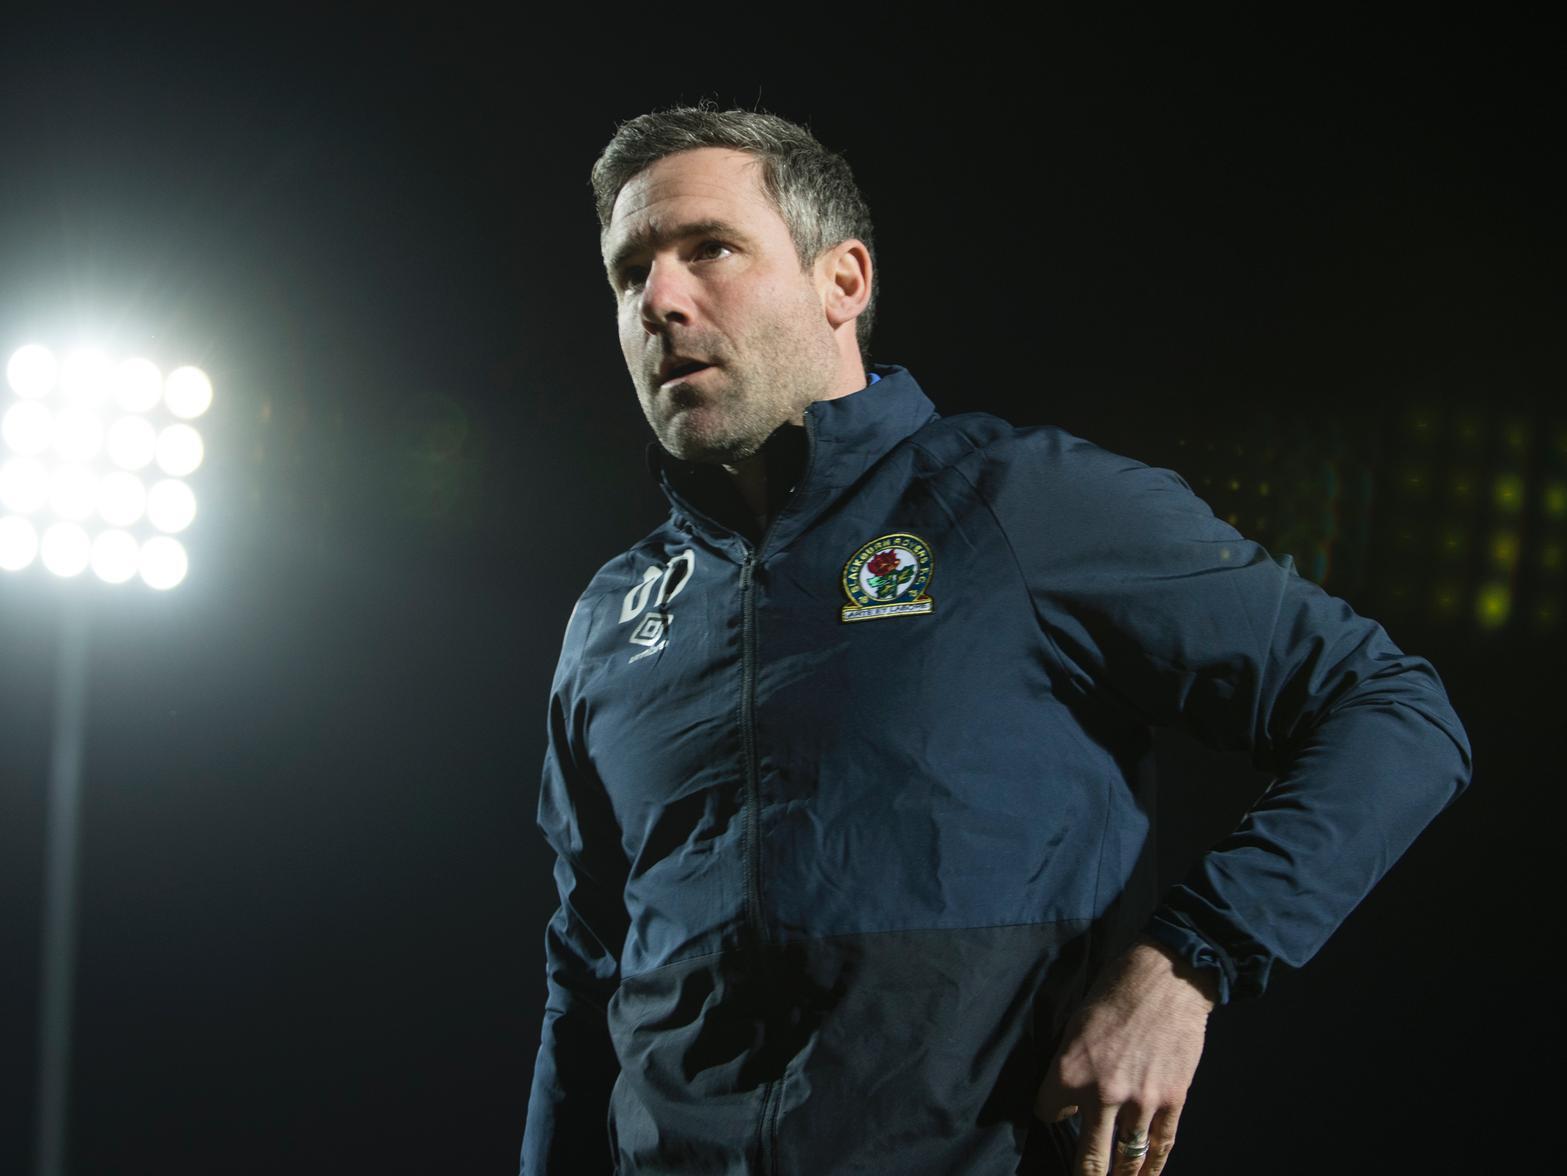 The firmer Birmingham and Blackburn man is 10/1 to bag the job after being handed a caretaker role at Bloomfield Road.